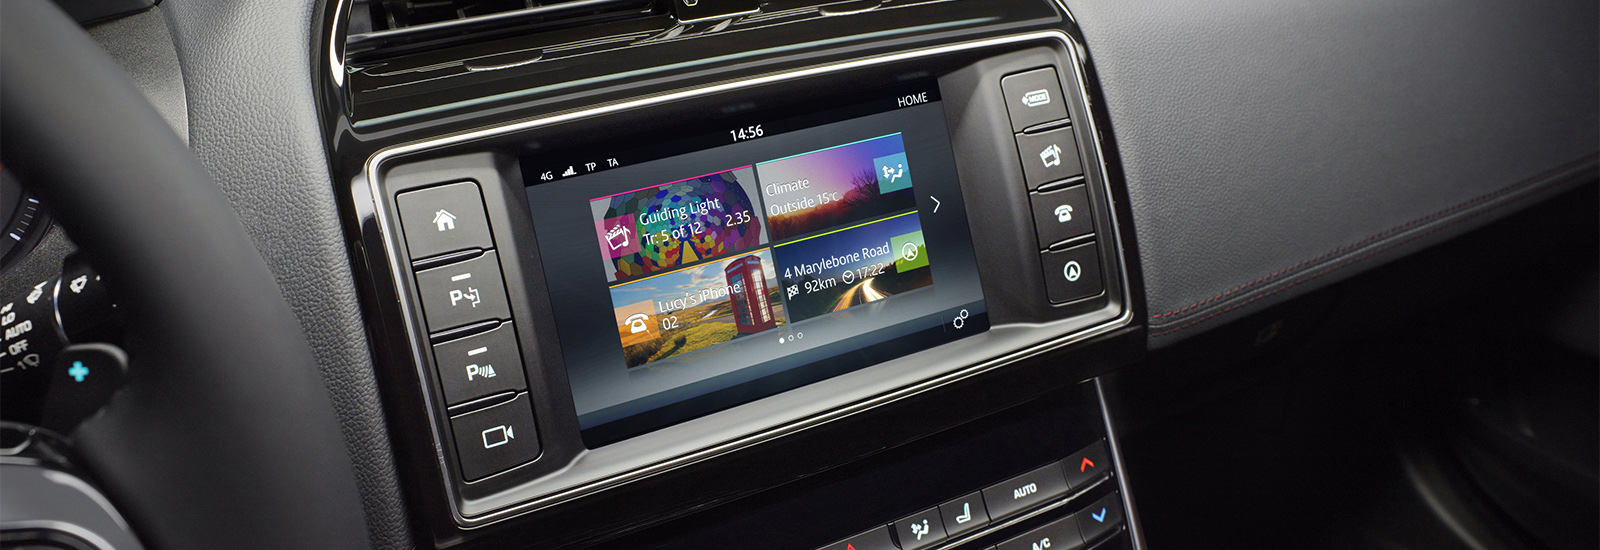 incontrol touch pro infotainment system specs